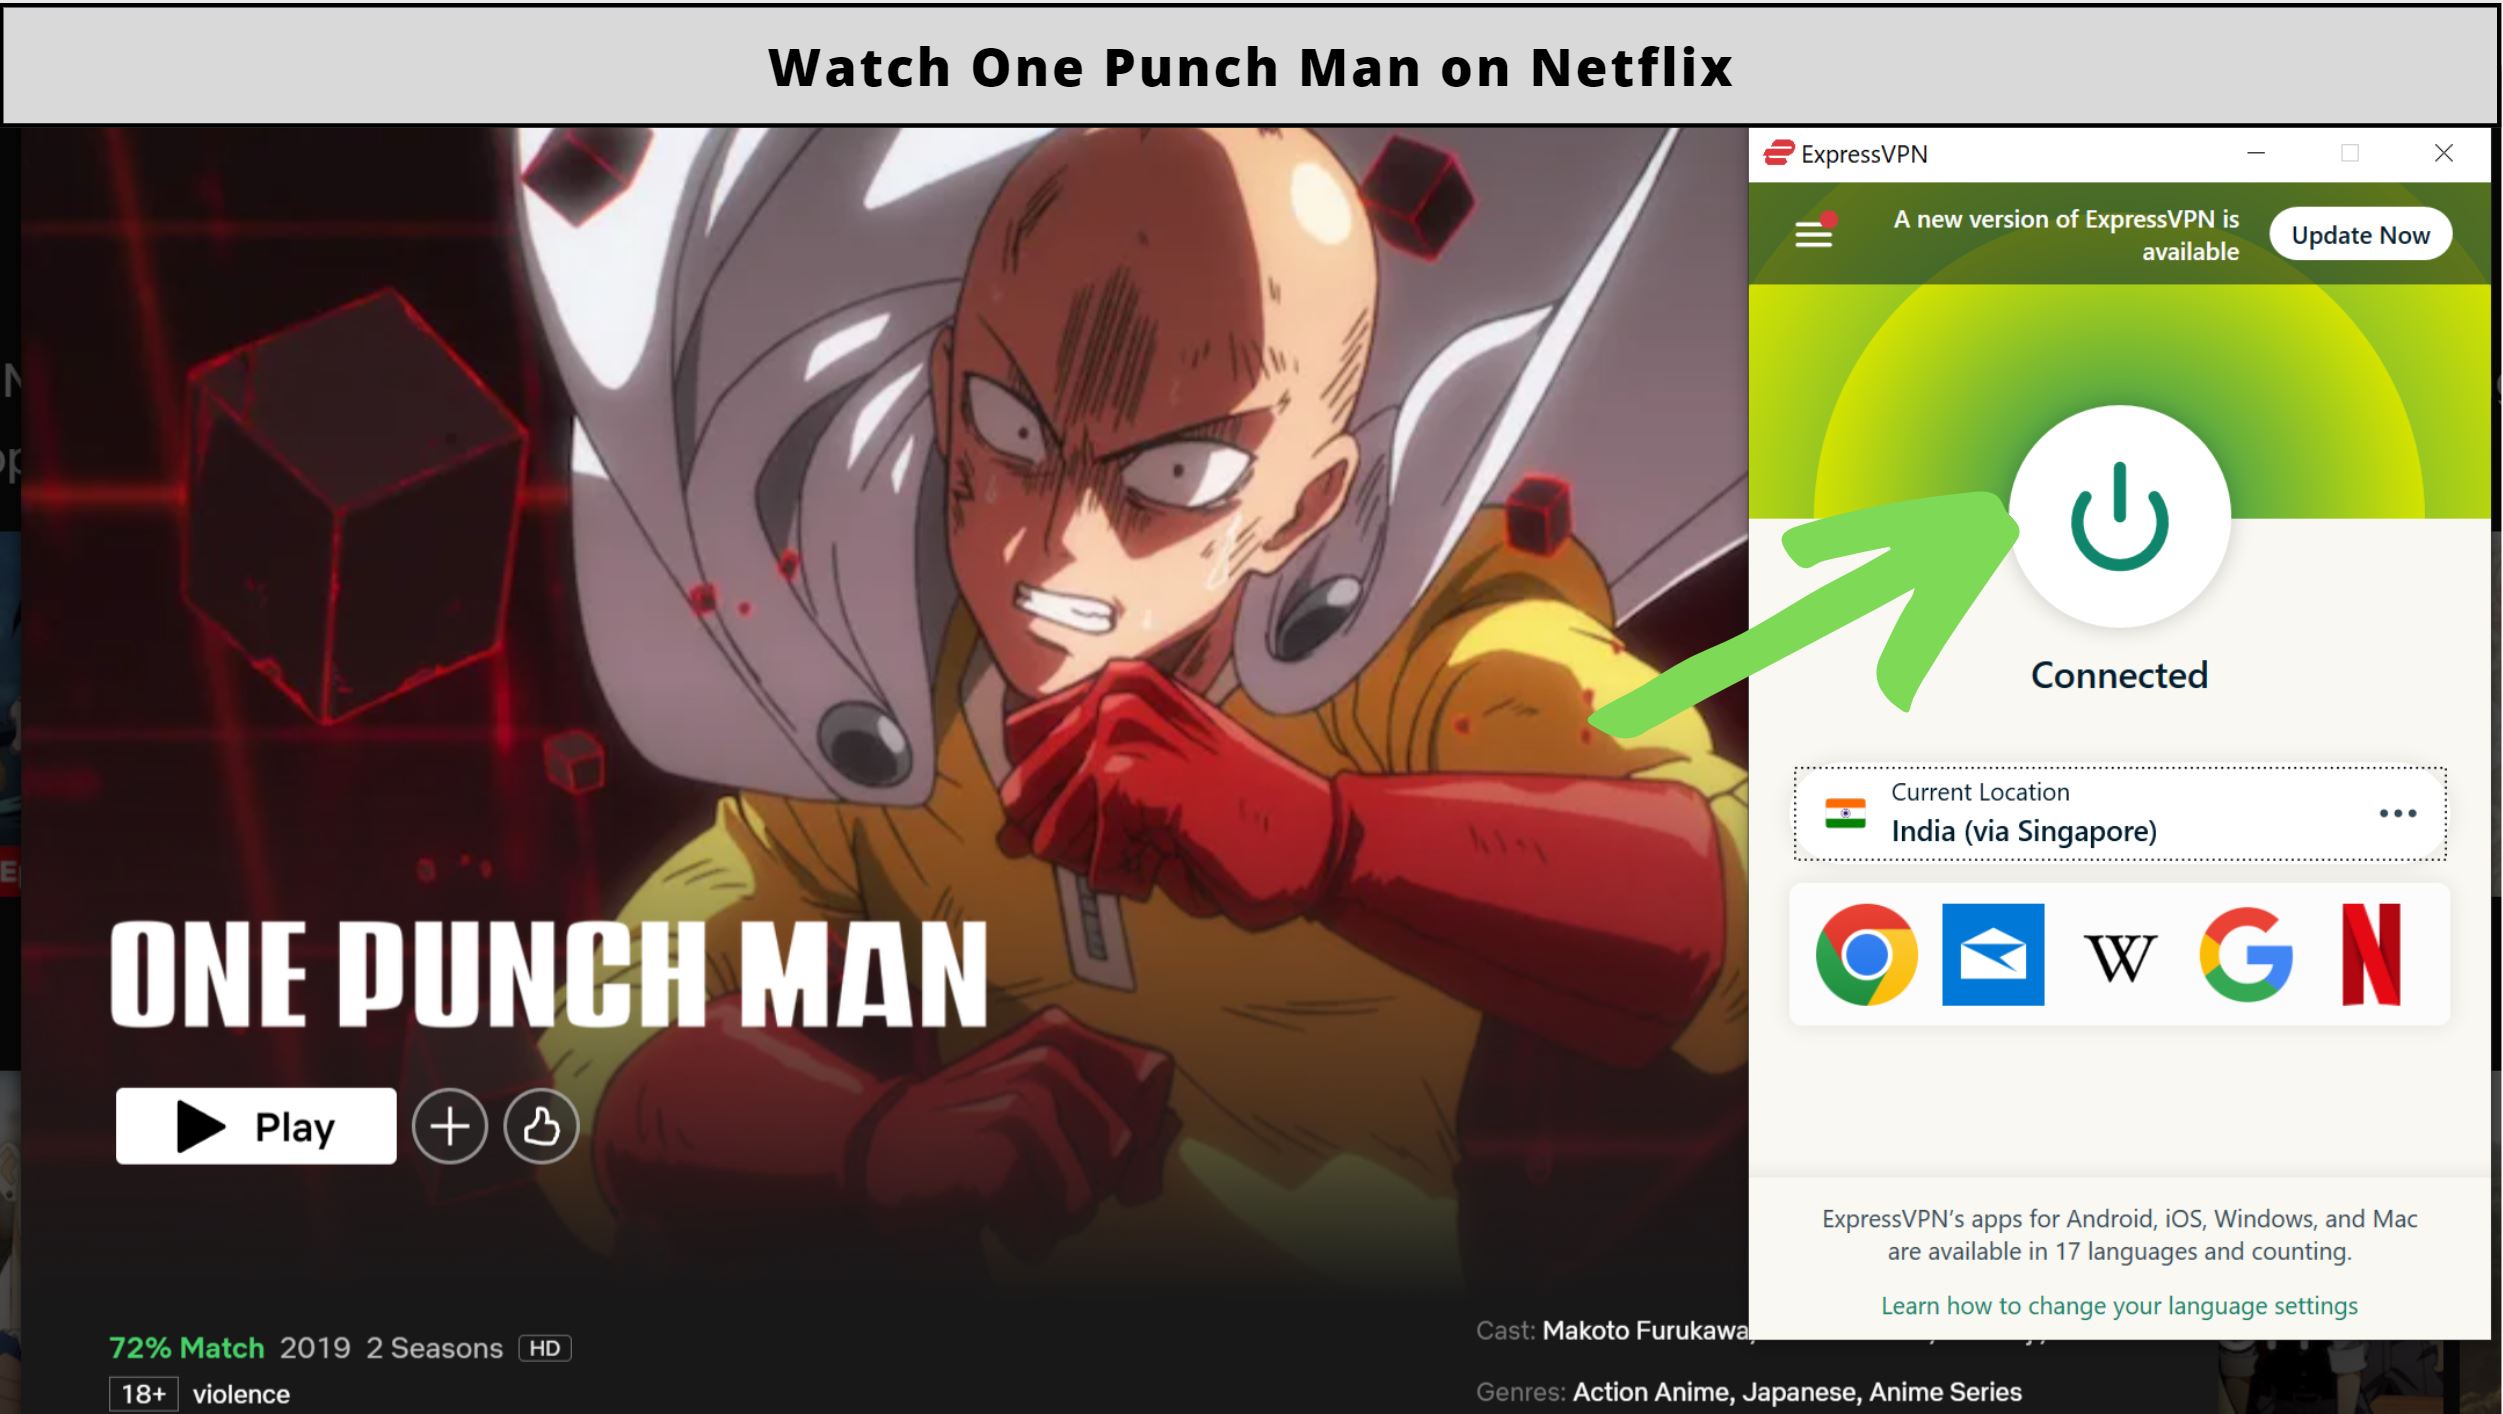 Is One Punch Man on Netflix?